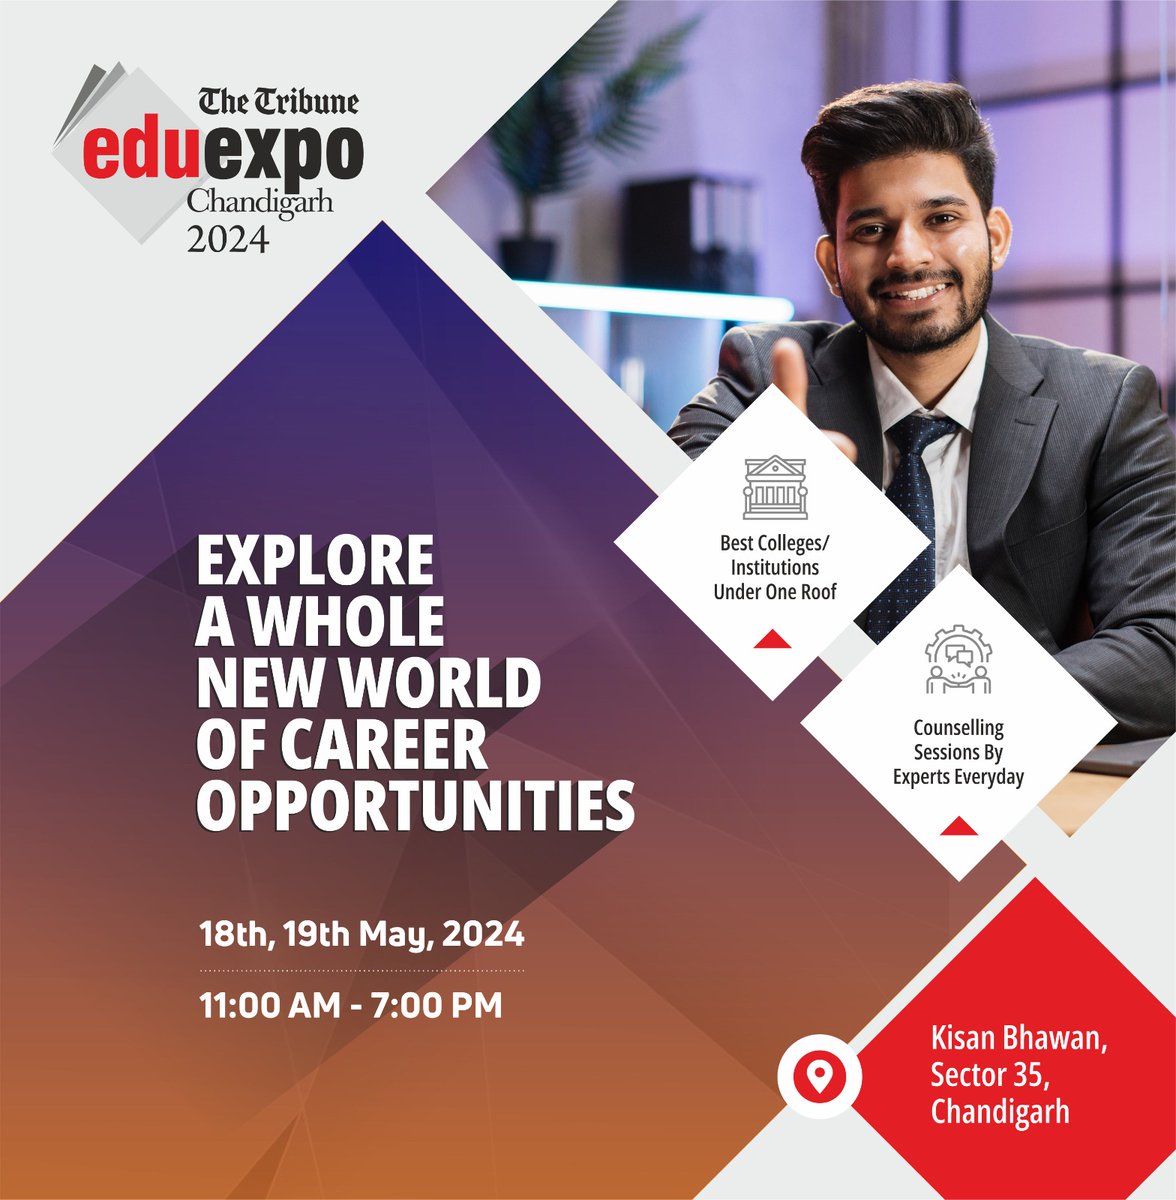 The Tribune EduExpo-2024 📝

🗓️May 18th to 19th
⏱ 11:00 am - 7:00 pm
📍 at Kisan Bhawan
Sector 35, Chandigarh

#eduexpo2024 #eduexpo #education #highereducation #educationfirst #bestcolleges #CounsellingSession #consultants #event #higherstudies #counselors #qualityeducation